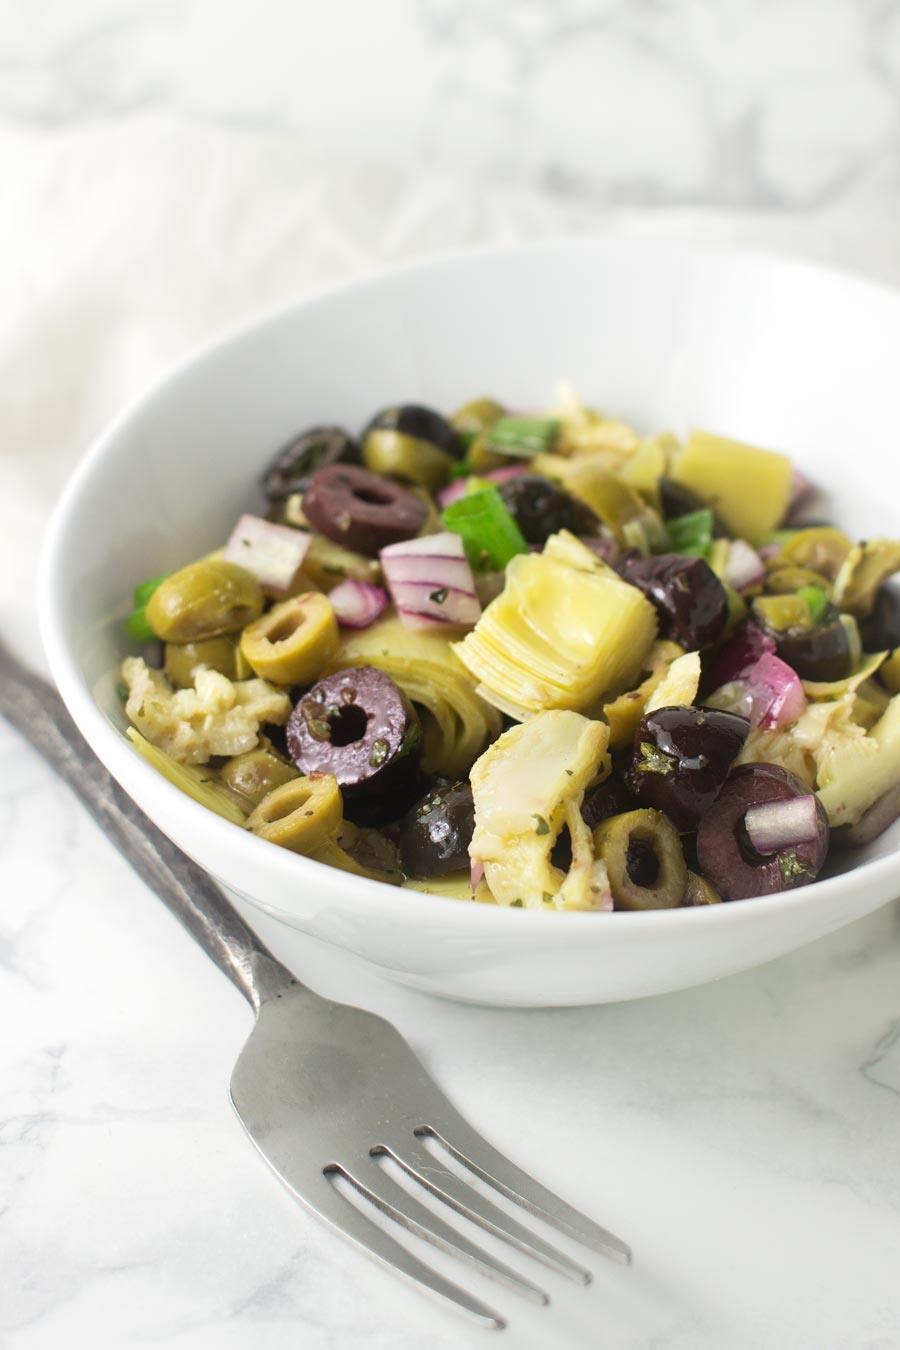 Olive Salad recipe from acleanplate.com #paleo #aip #glutenfree